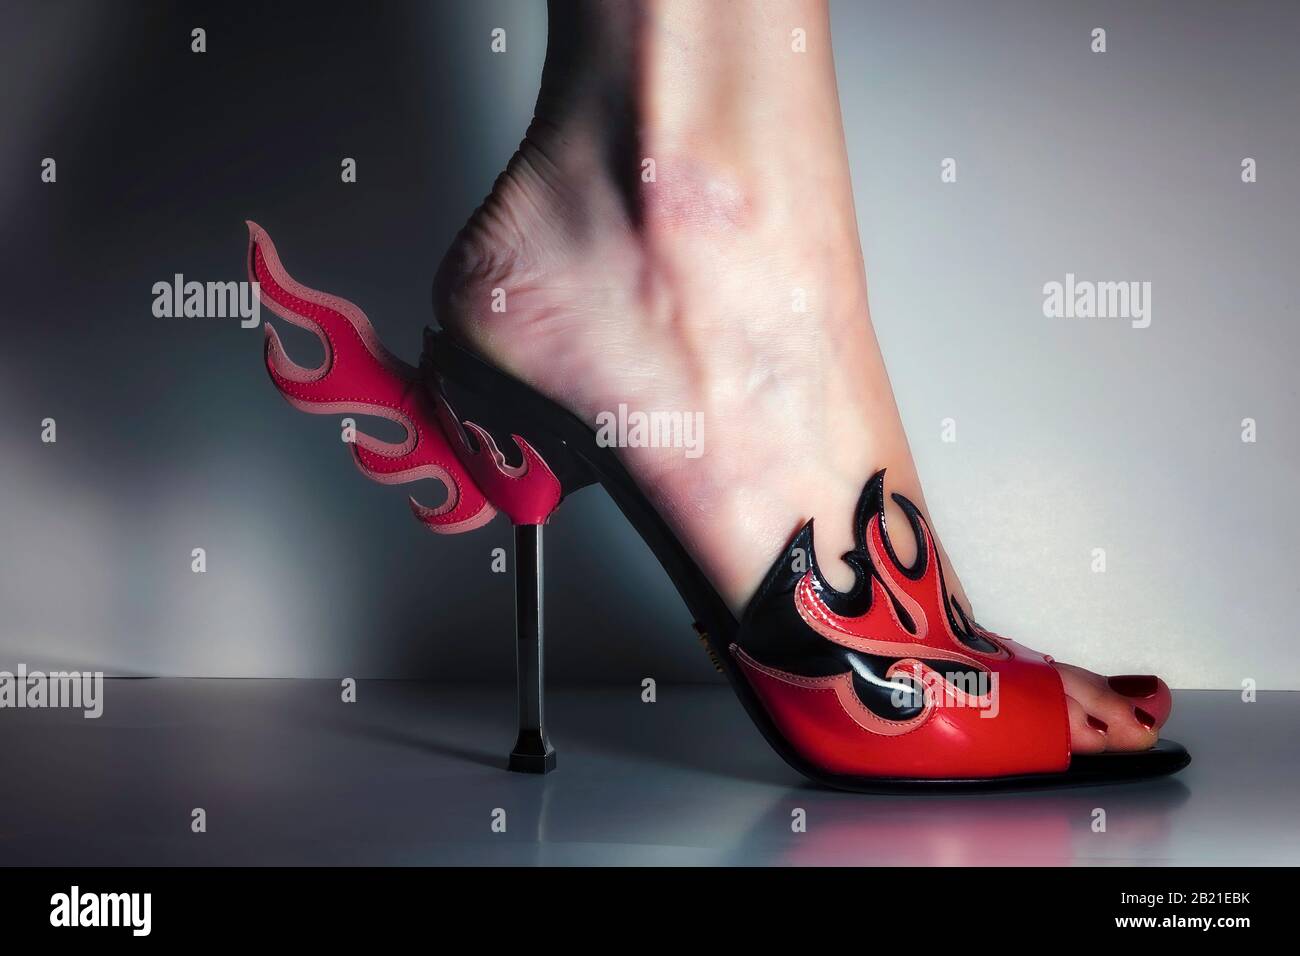 Prada flame high heel shoes with woman's foot, side view, color Stock Photo  - Alamy